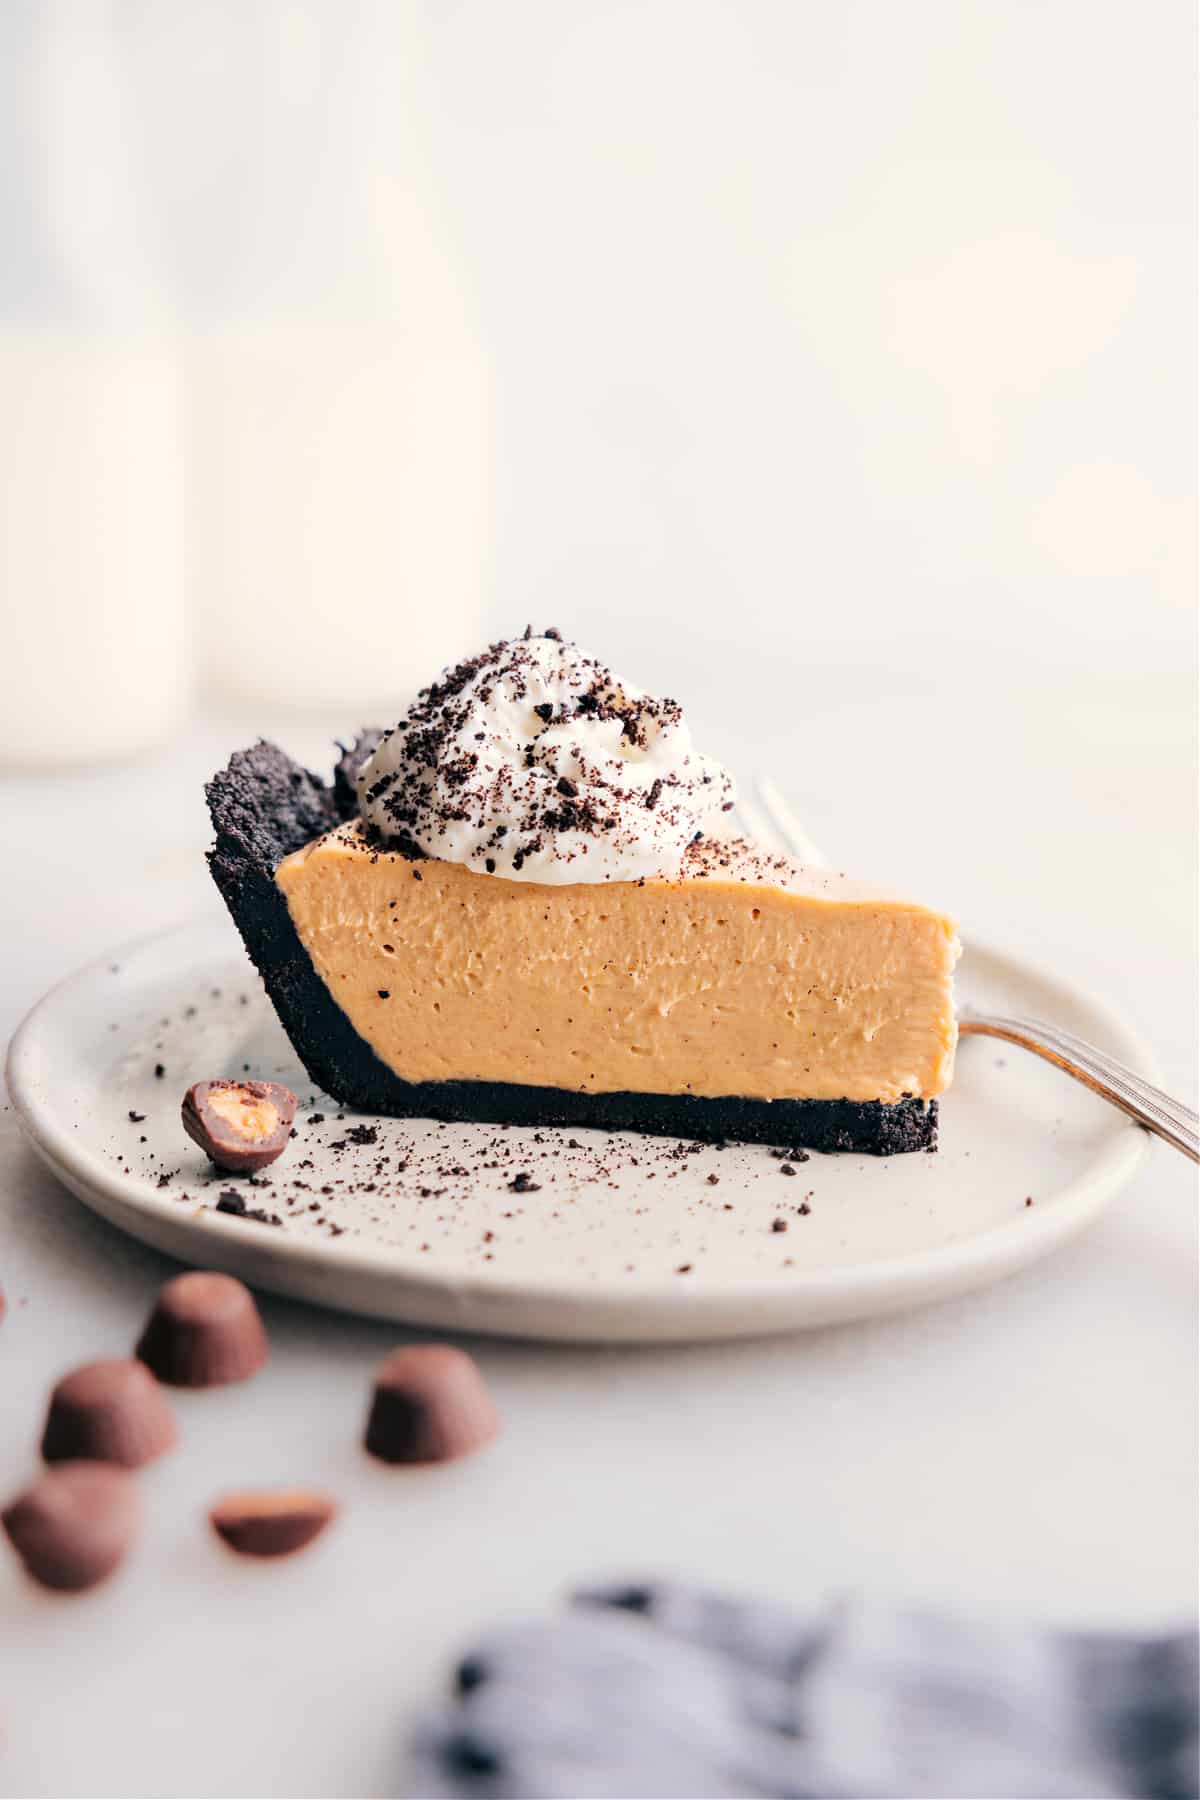 Slice of Peanut Butter Pie ready to be enjoyed.